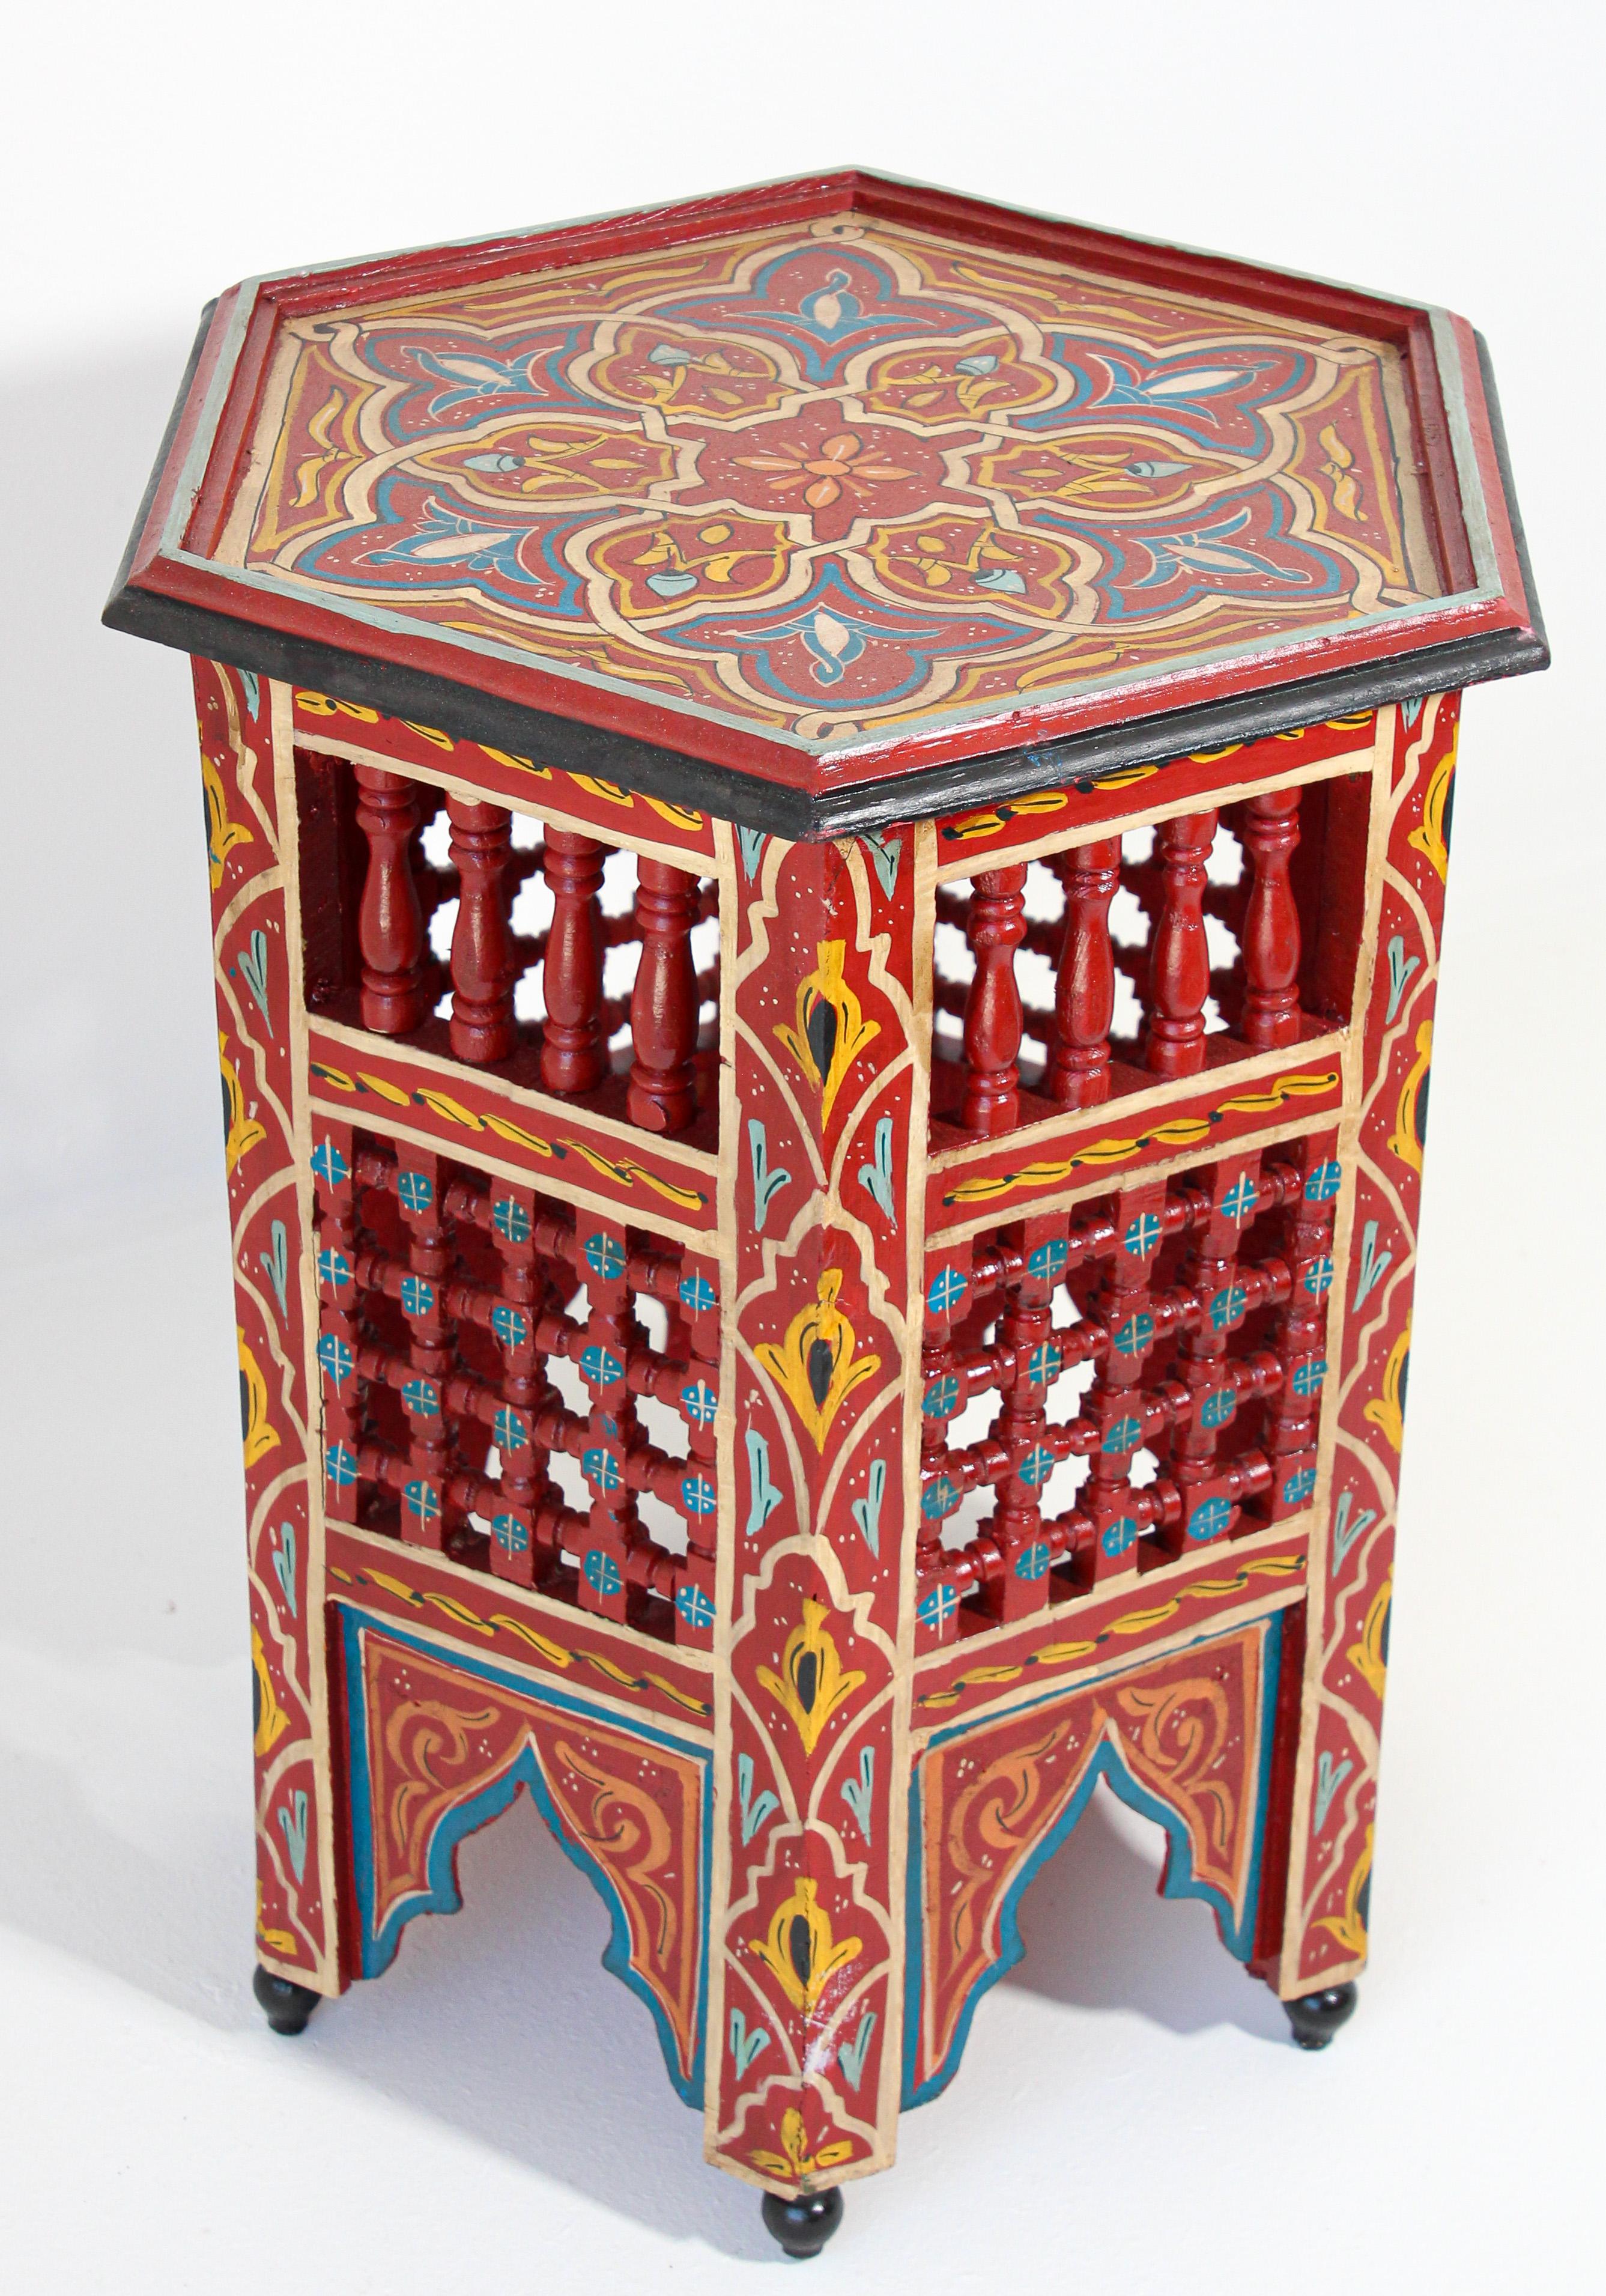 Moroccan handcrafted and hand painted side table.
Moucharabie fret work octagonal stool with Moorish arches.
Handcrafted in Hispano Moresque style and hand painted on red color background with wine, aqua, green and ochre Moorish floral and